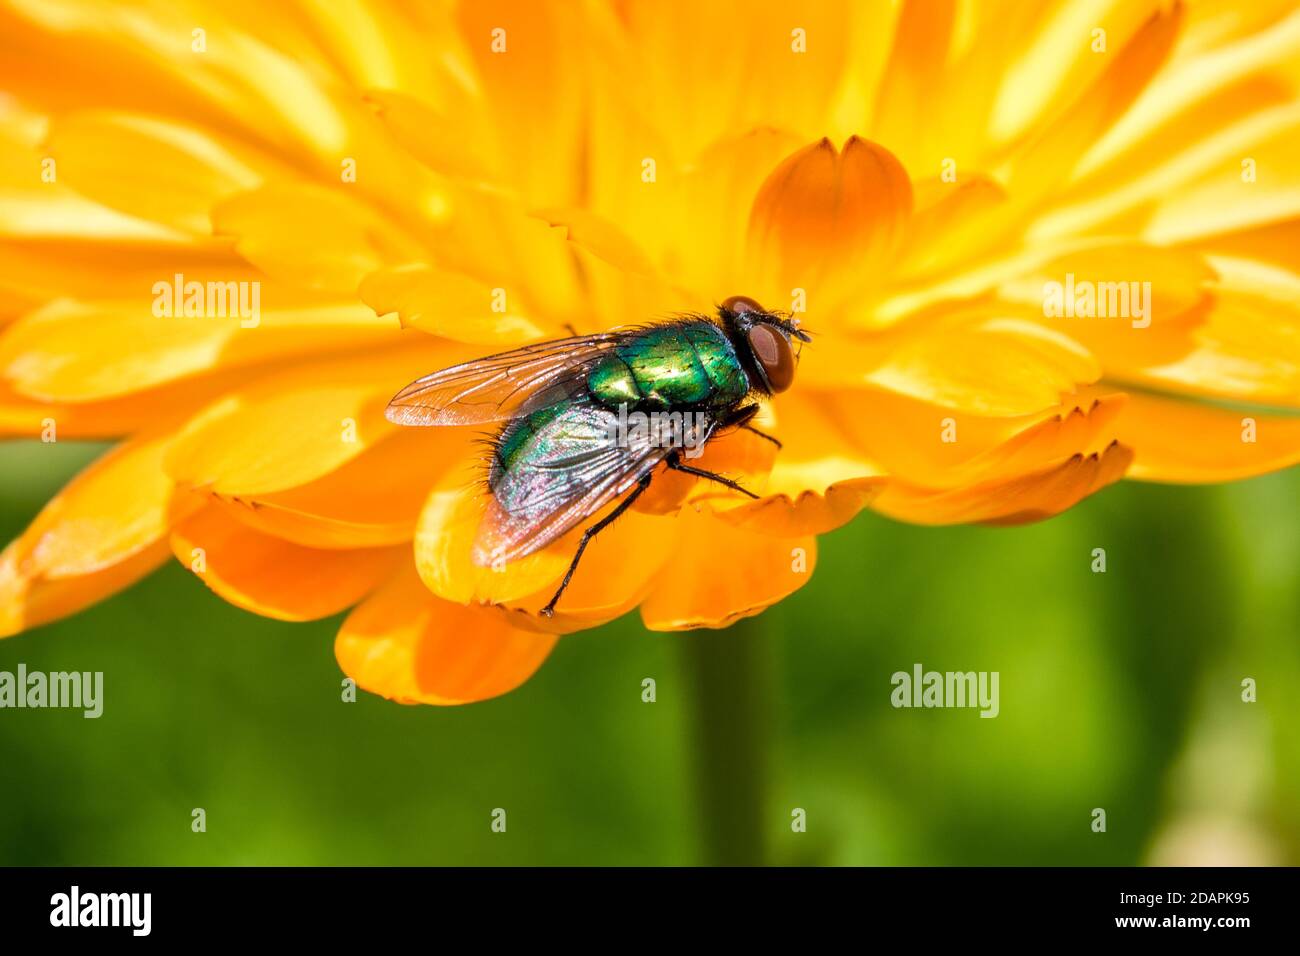 Common GreenBottle Fly on Yellow Flower Petals Stock Photo